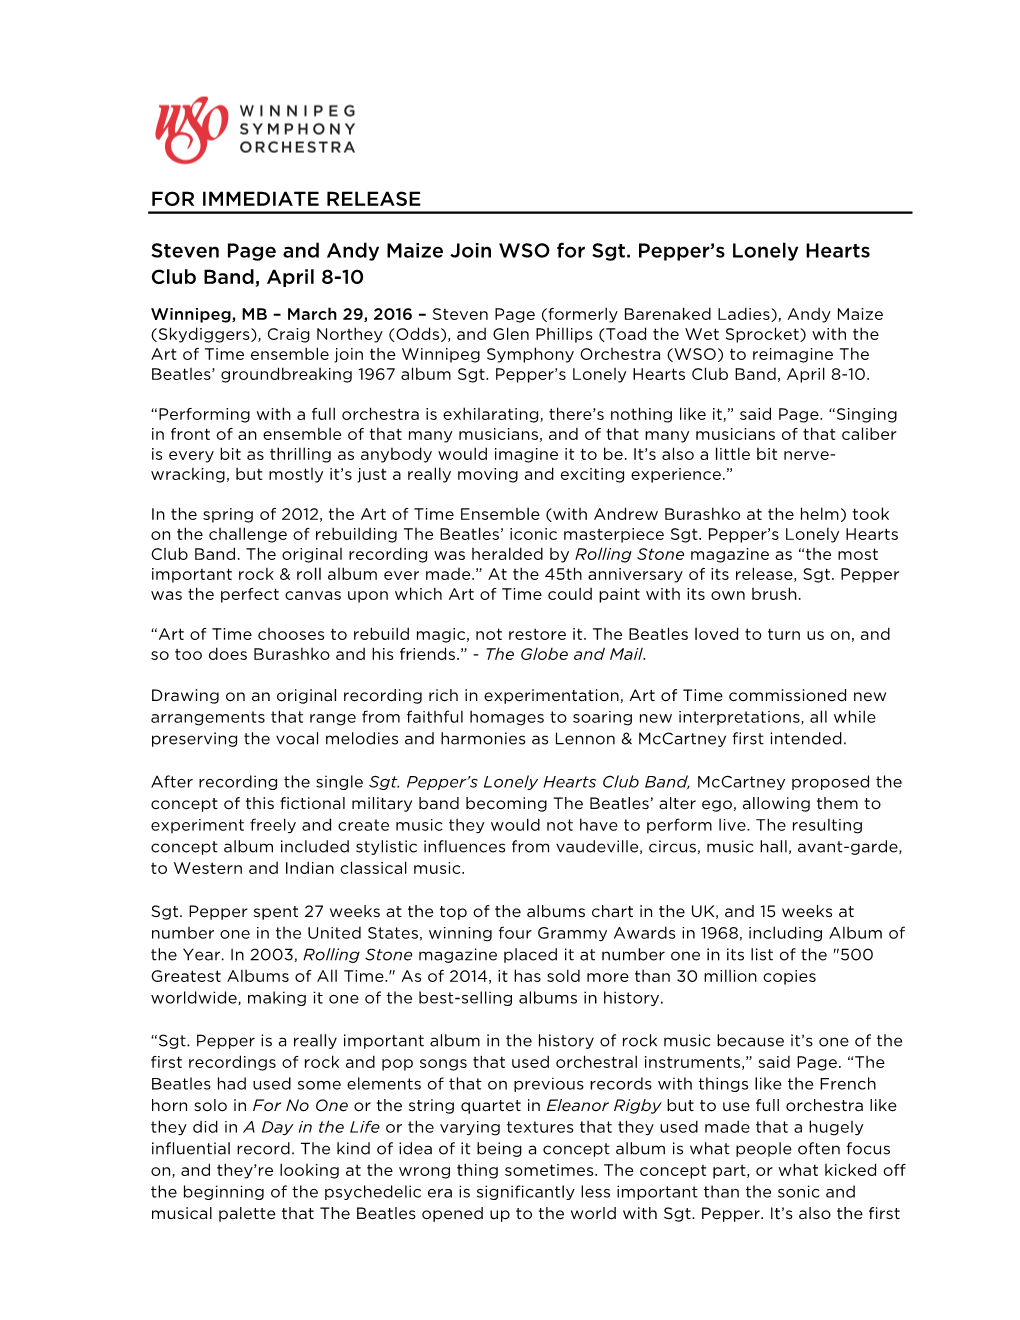 FOR IMMEDIATE RELEASE Steven Page and Andy Maize Join WSO For